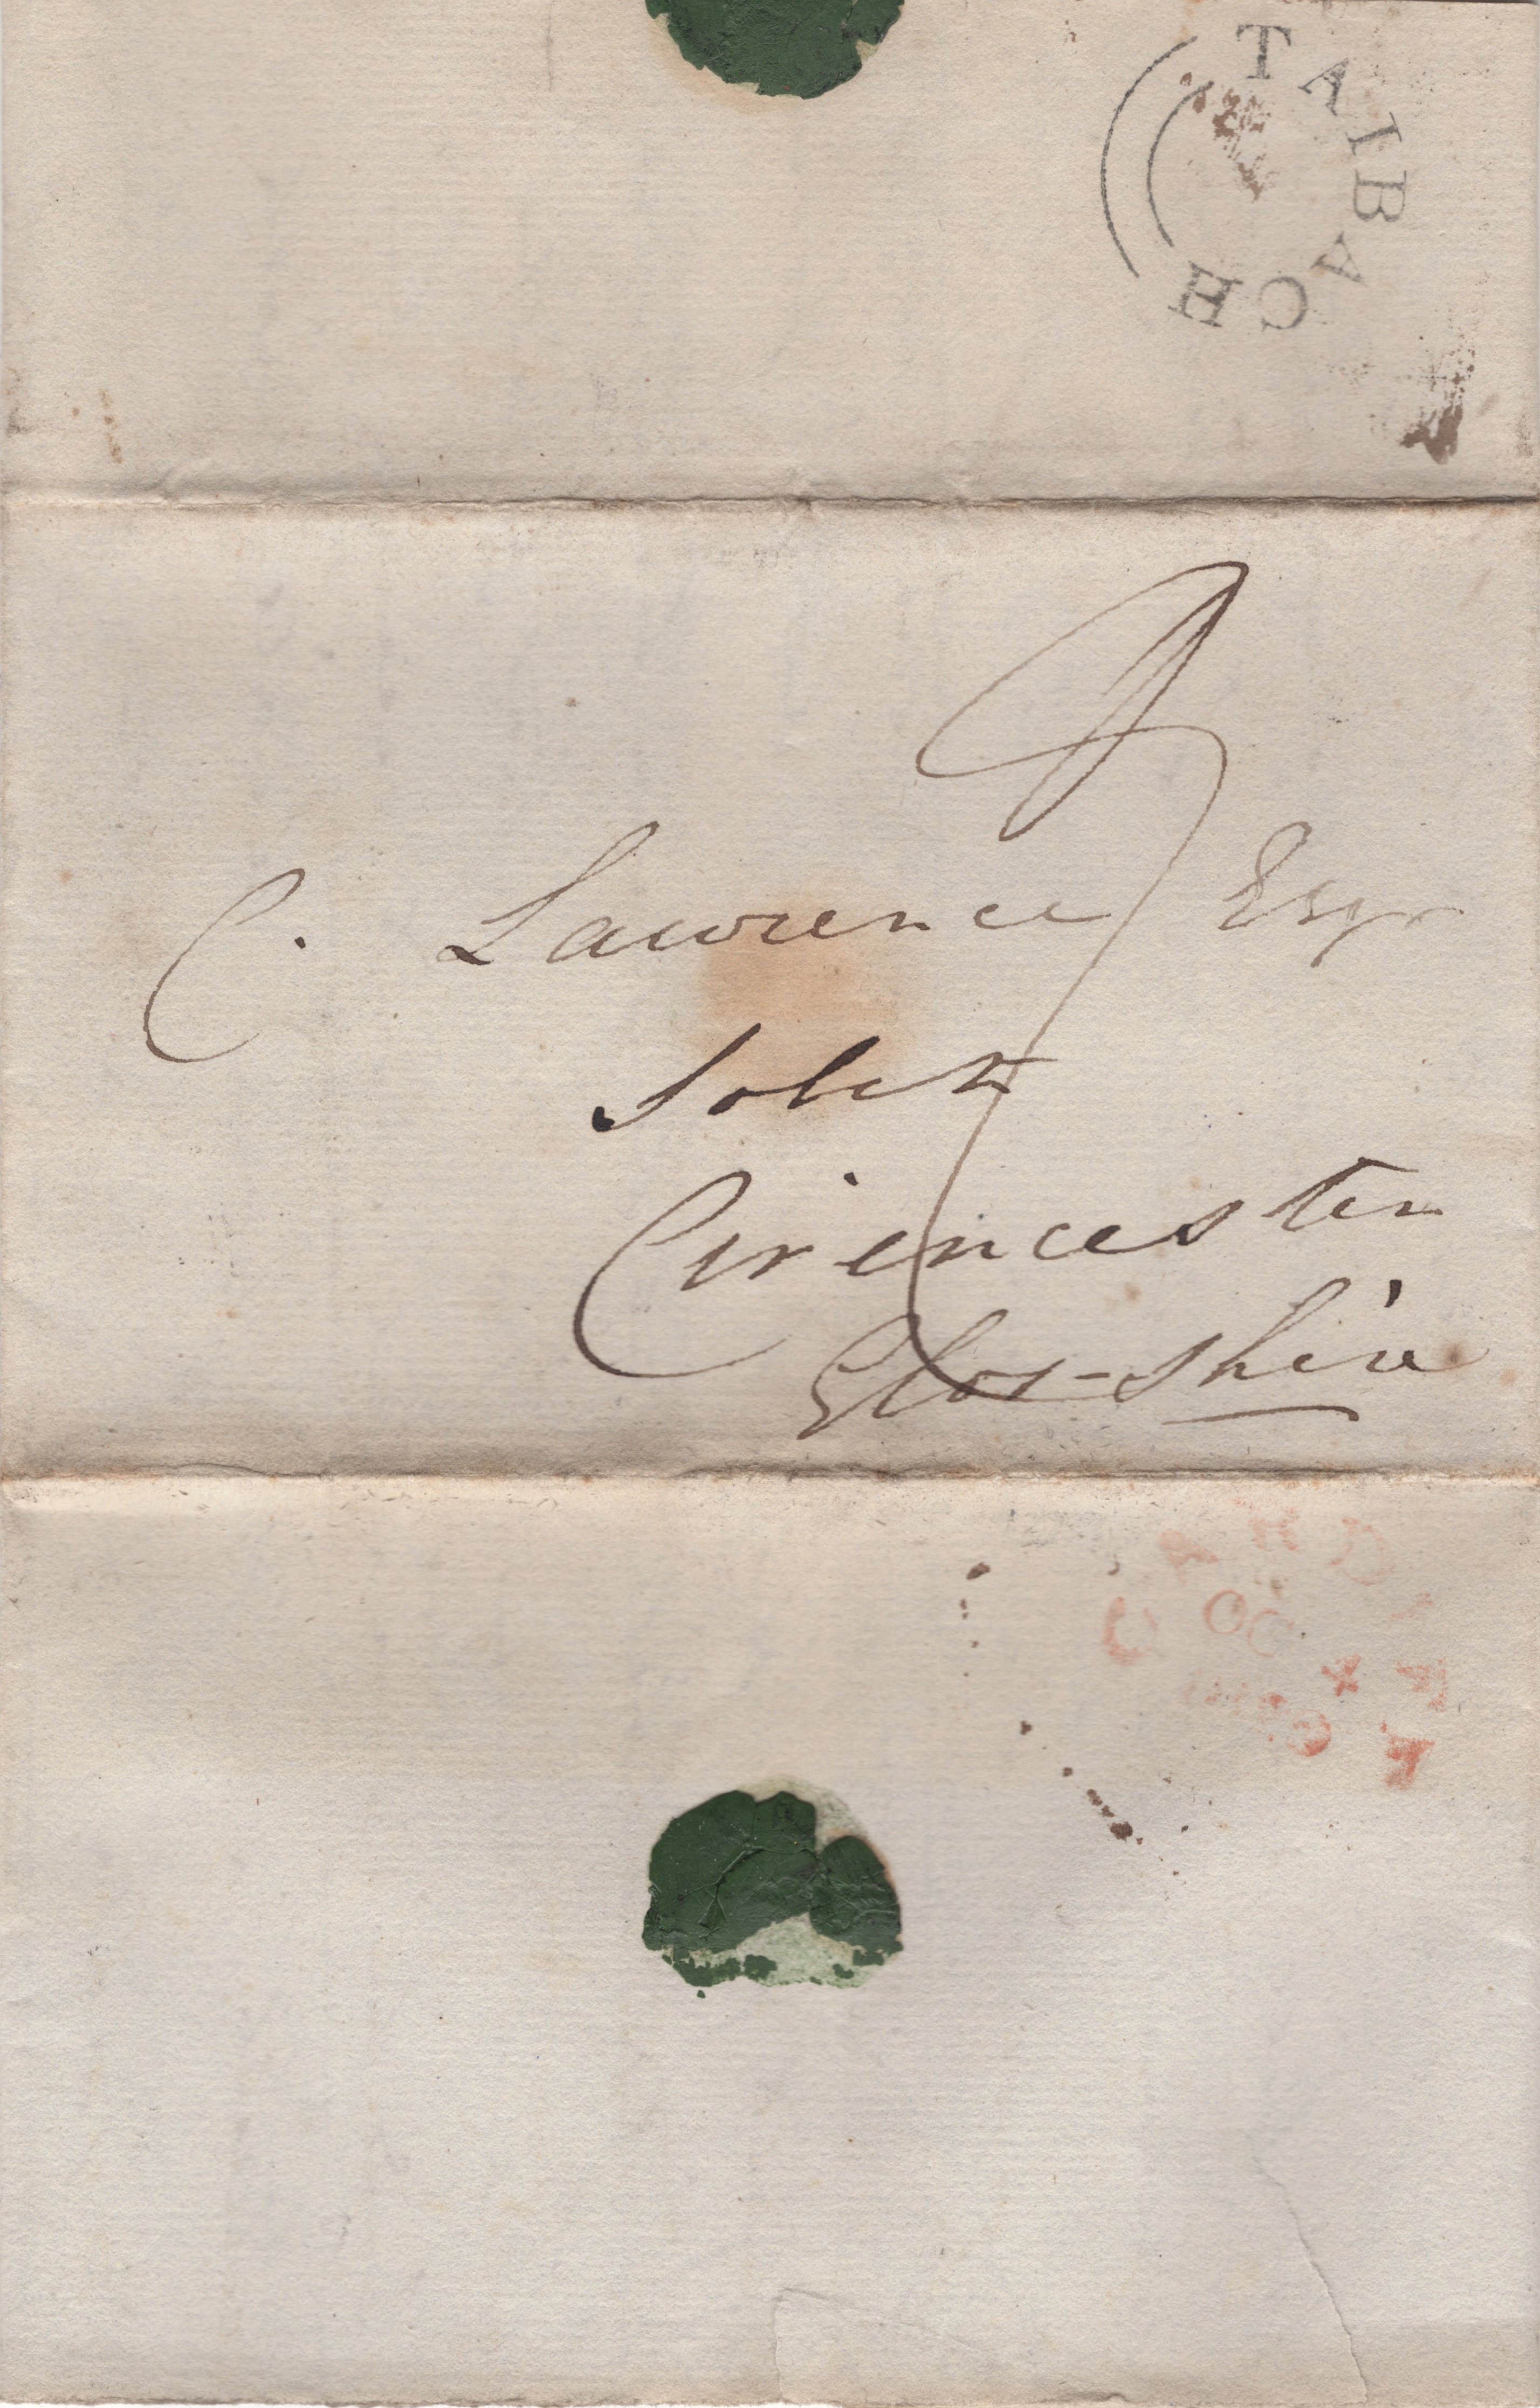 Entire from Taibach to Cirencester via Cardiff (Circular Dated mark with mileage 163 removed, rate 9d